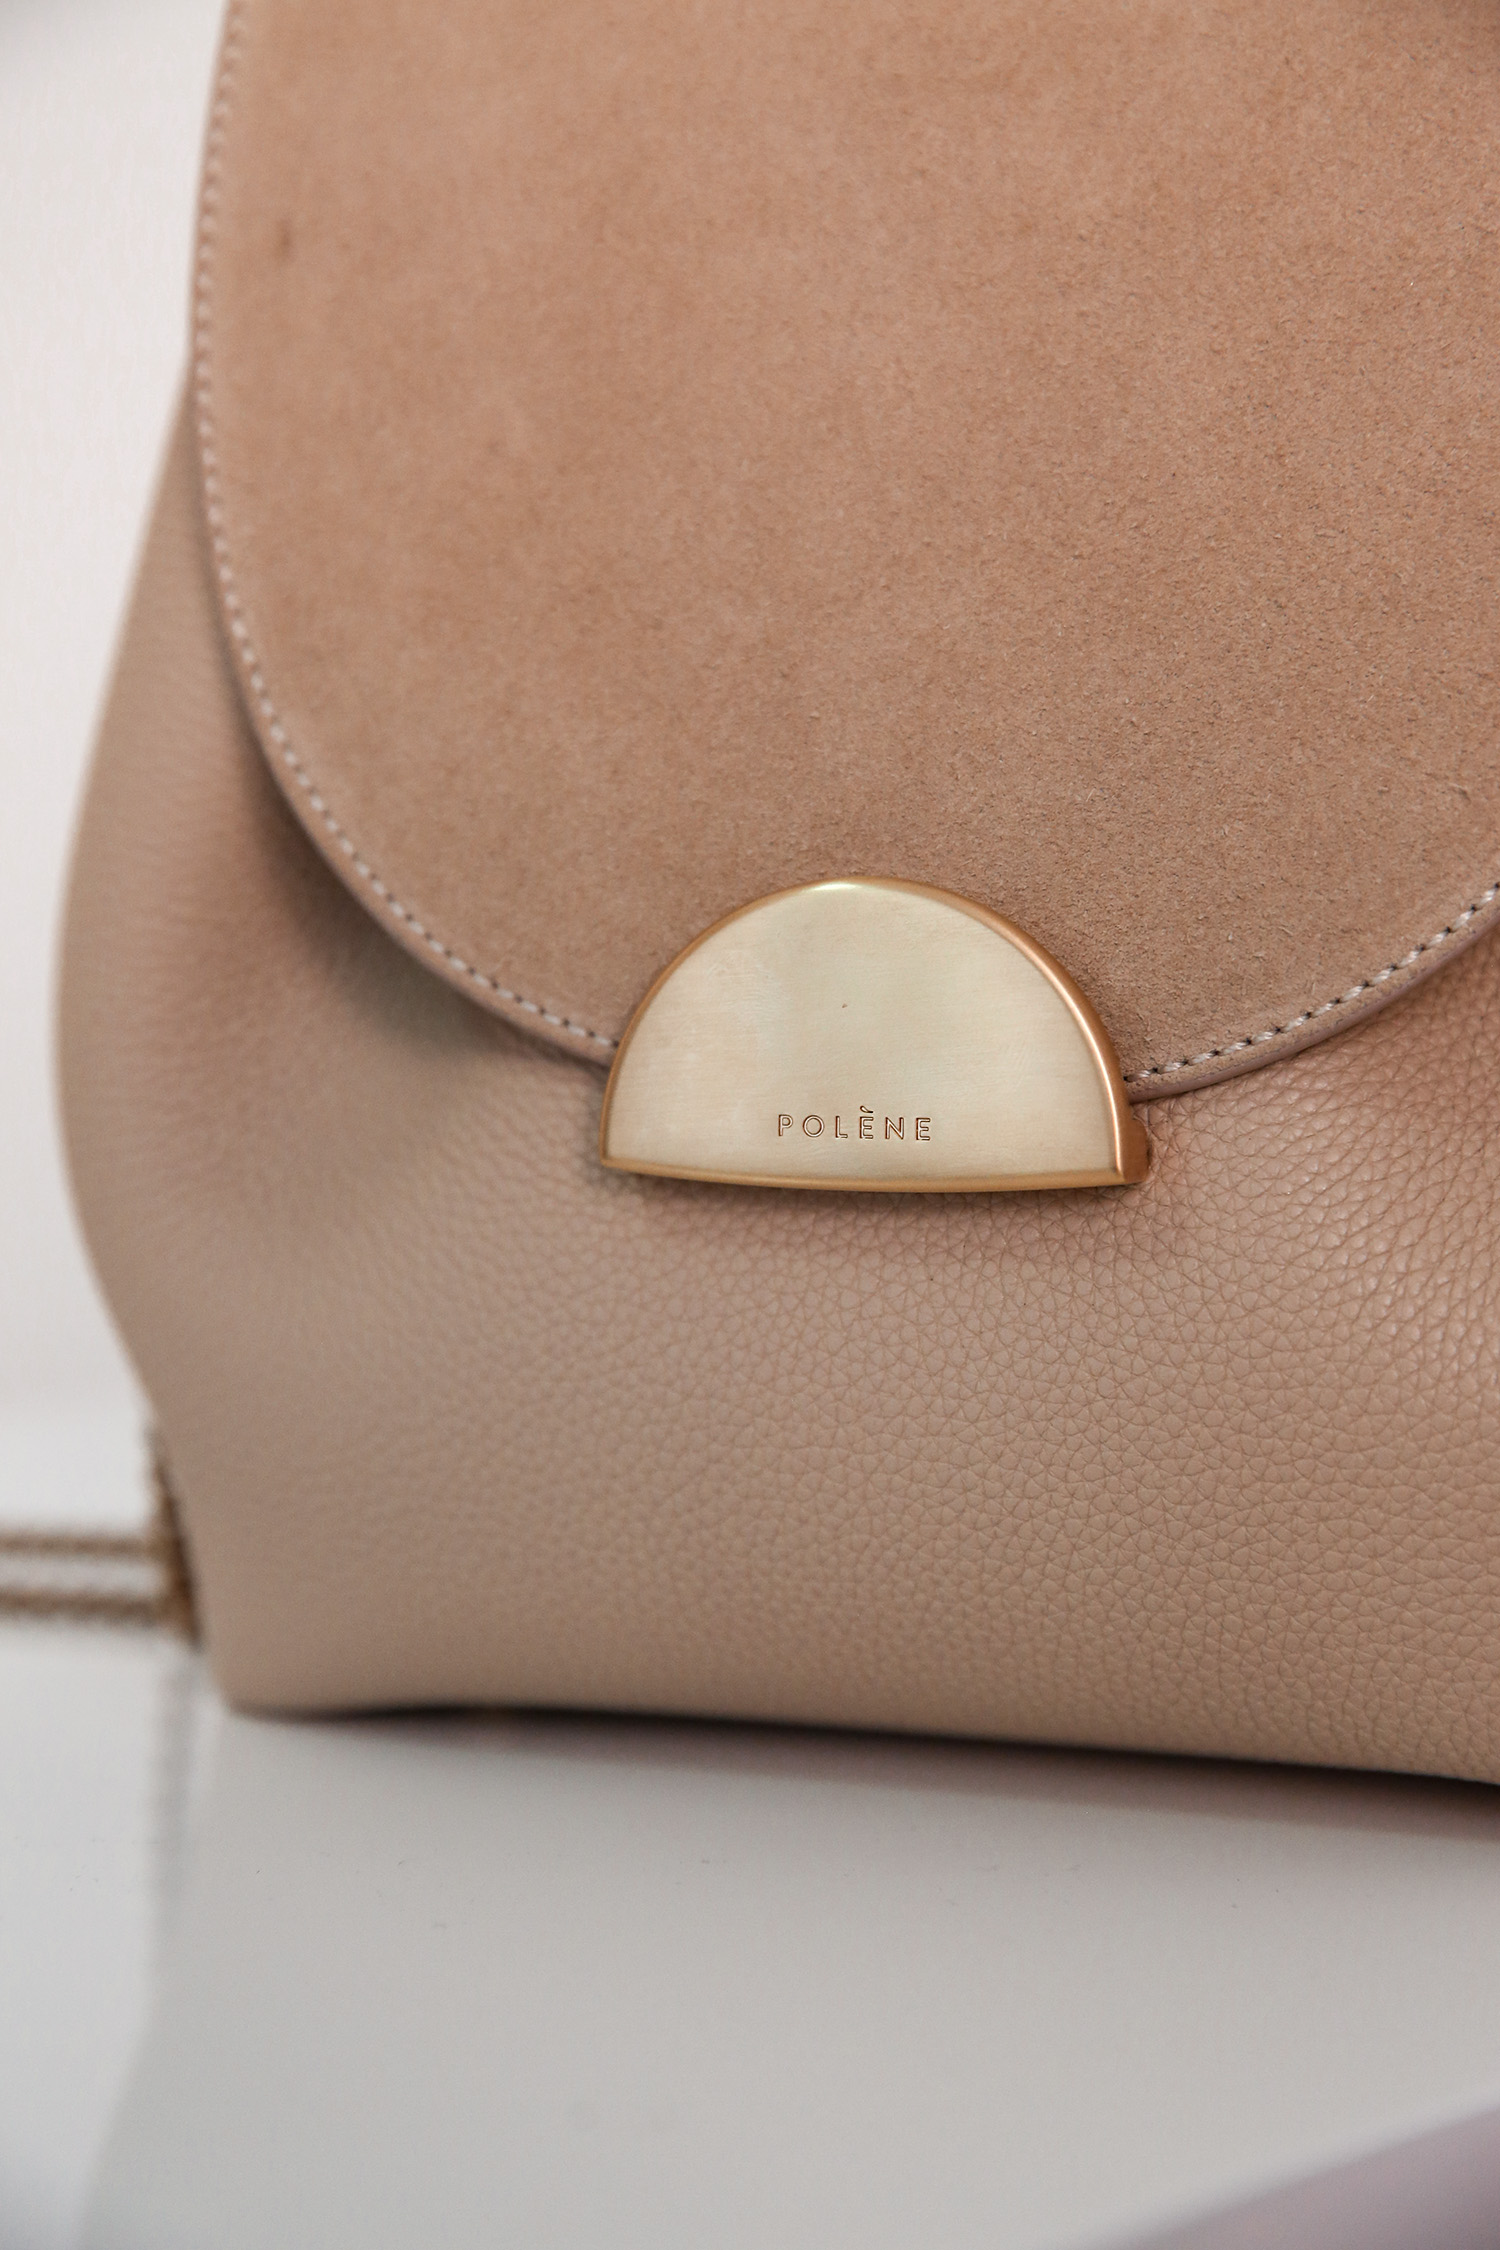 Polene Number One Bag Review - Mademoiselle